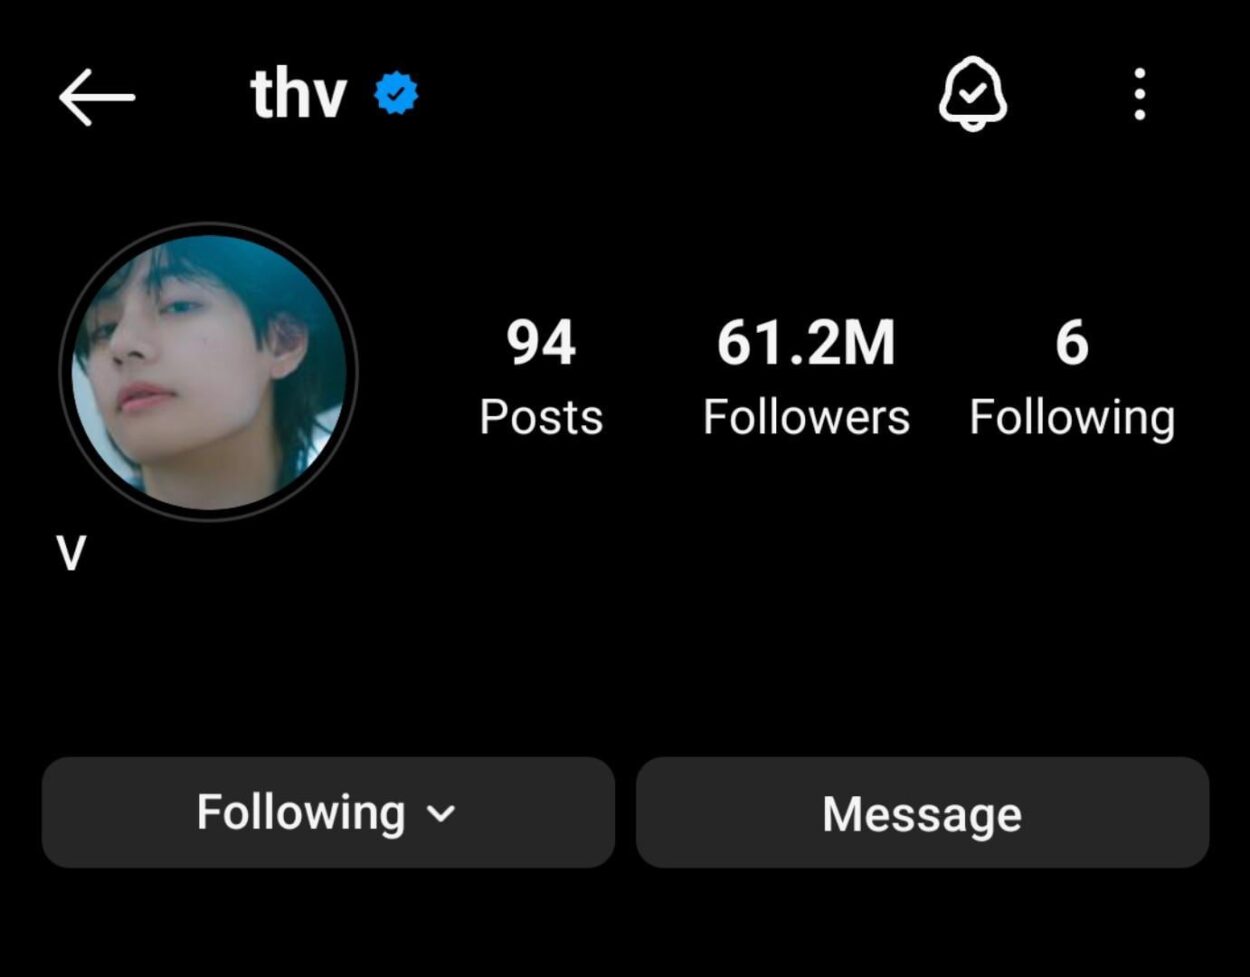 230907 V has updated his Instagram profile picture